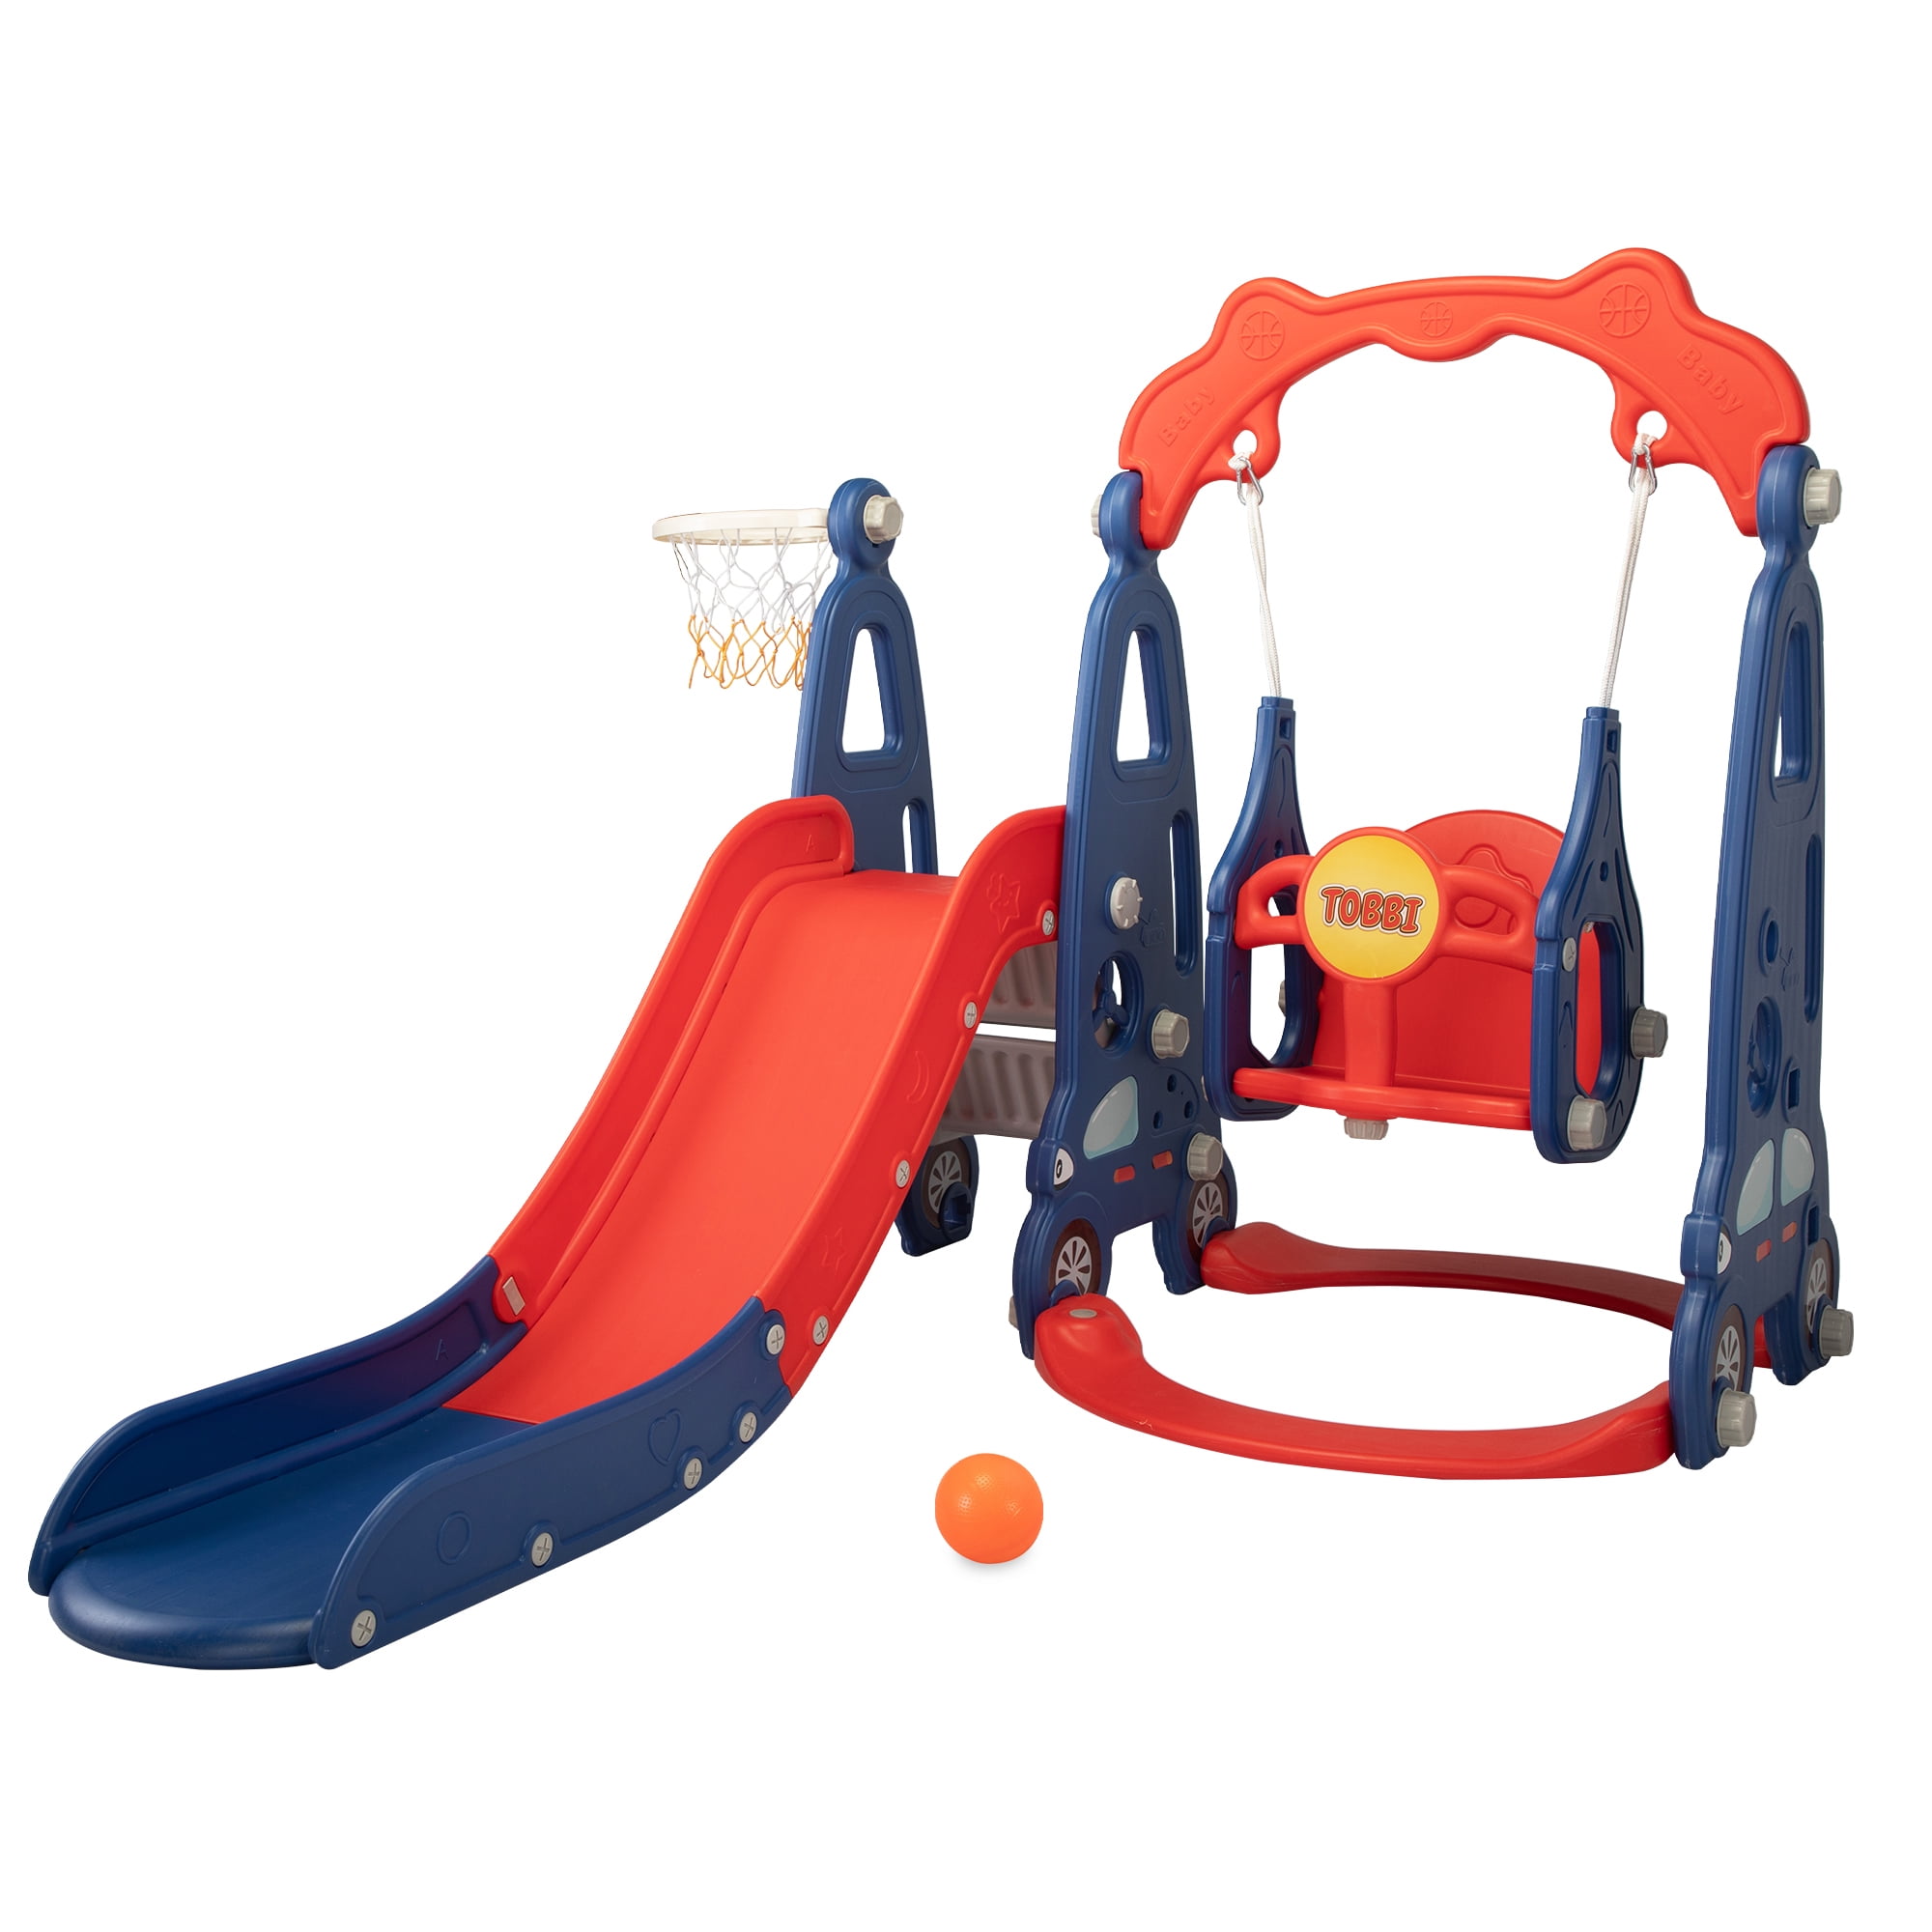 Indoor and Outdoor Playground Play Set Extra Long Slide 4 in 1 Toddler Play Climber Playset with Basketball Hoop Easy Set Up Baby Slide Kids Slide and Swing Set Safe & Sturdy Toddler Swing 